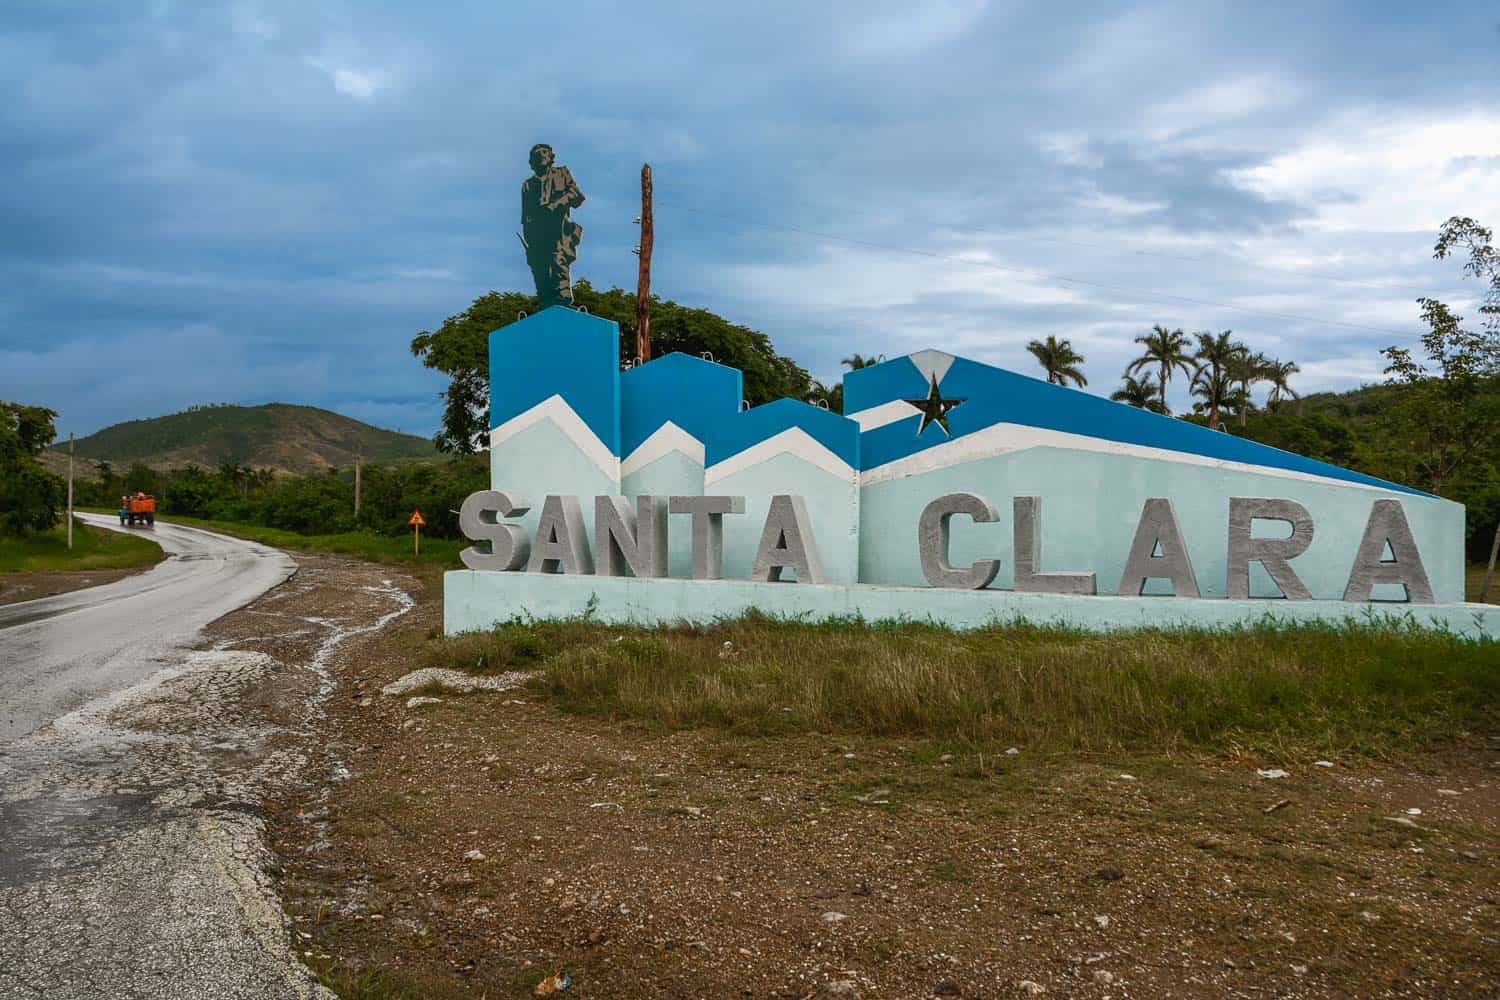  Sign at the entrance to the town of Santa Clara and the icon of Ernesto Che Guevara (Cuba)